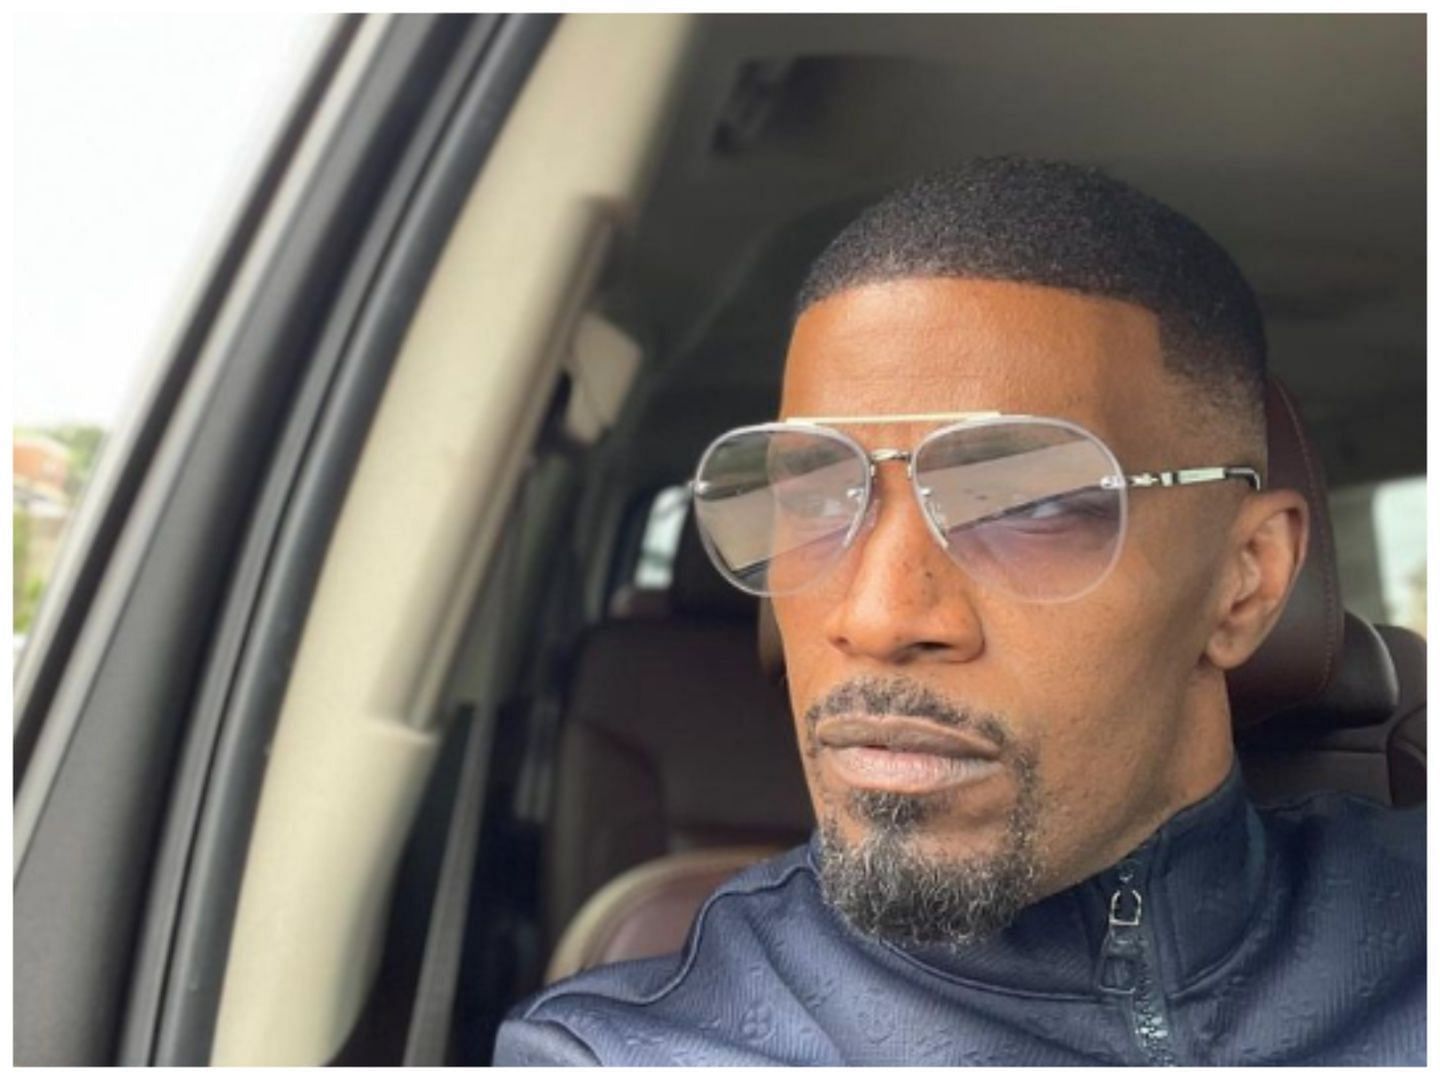 Foxx is still recovering from the health scare experienced last month. (image via IG @iamjamiefoxx)